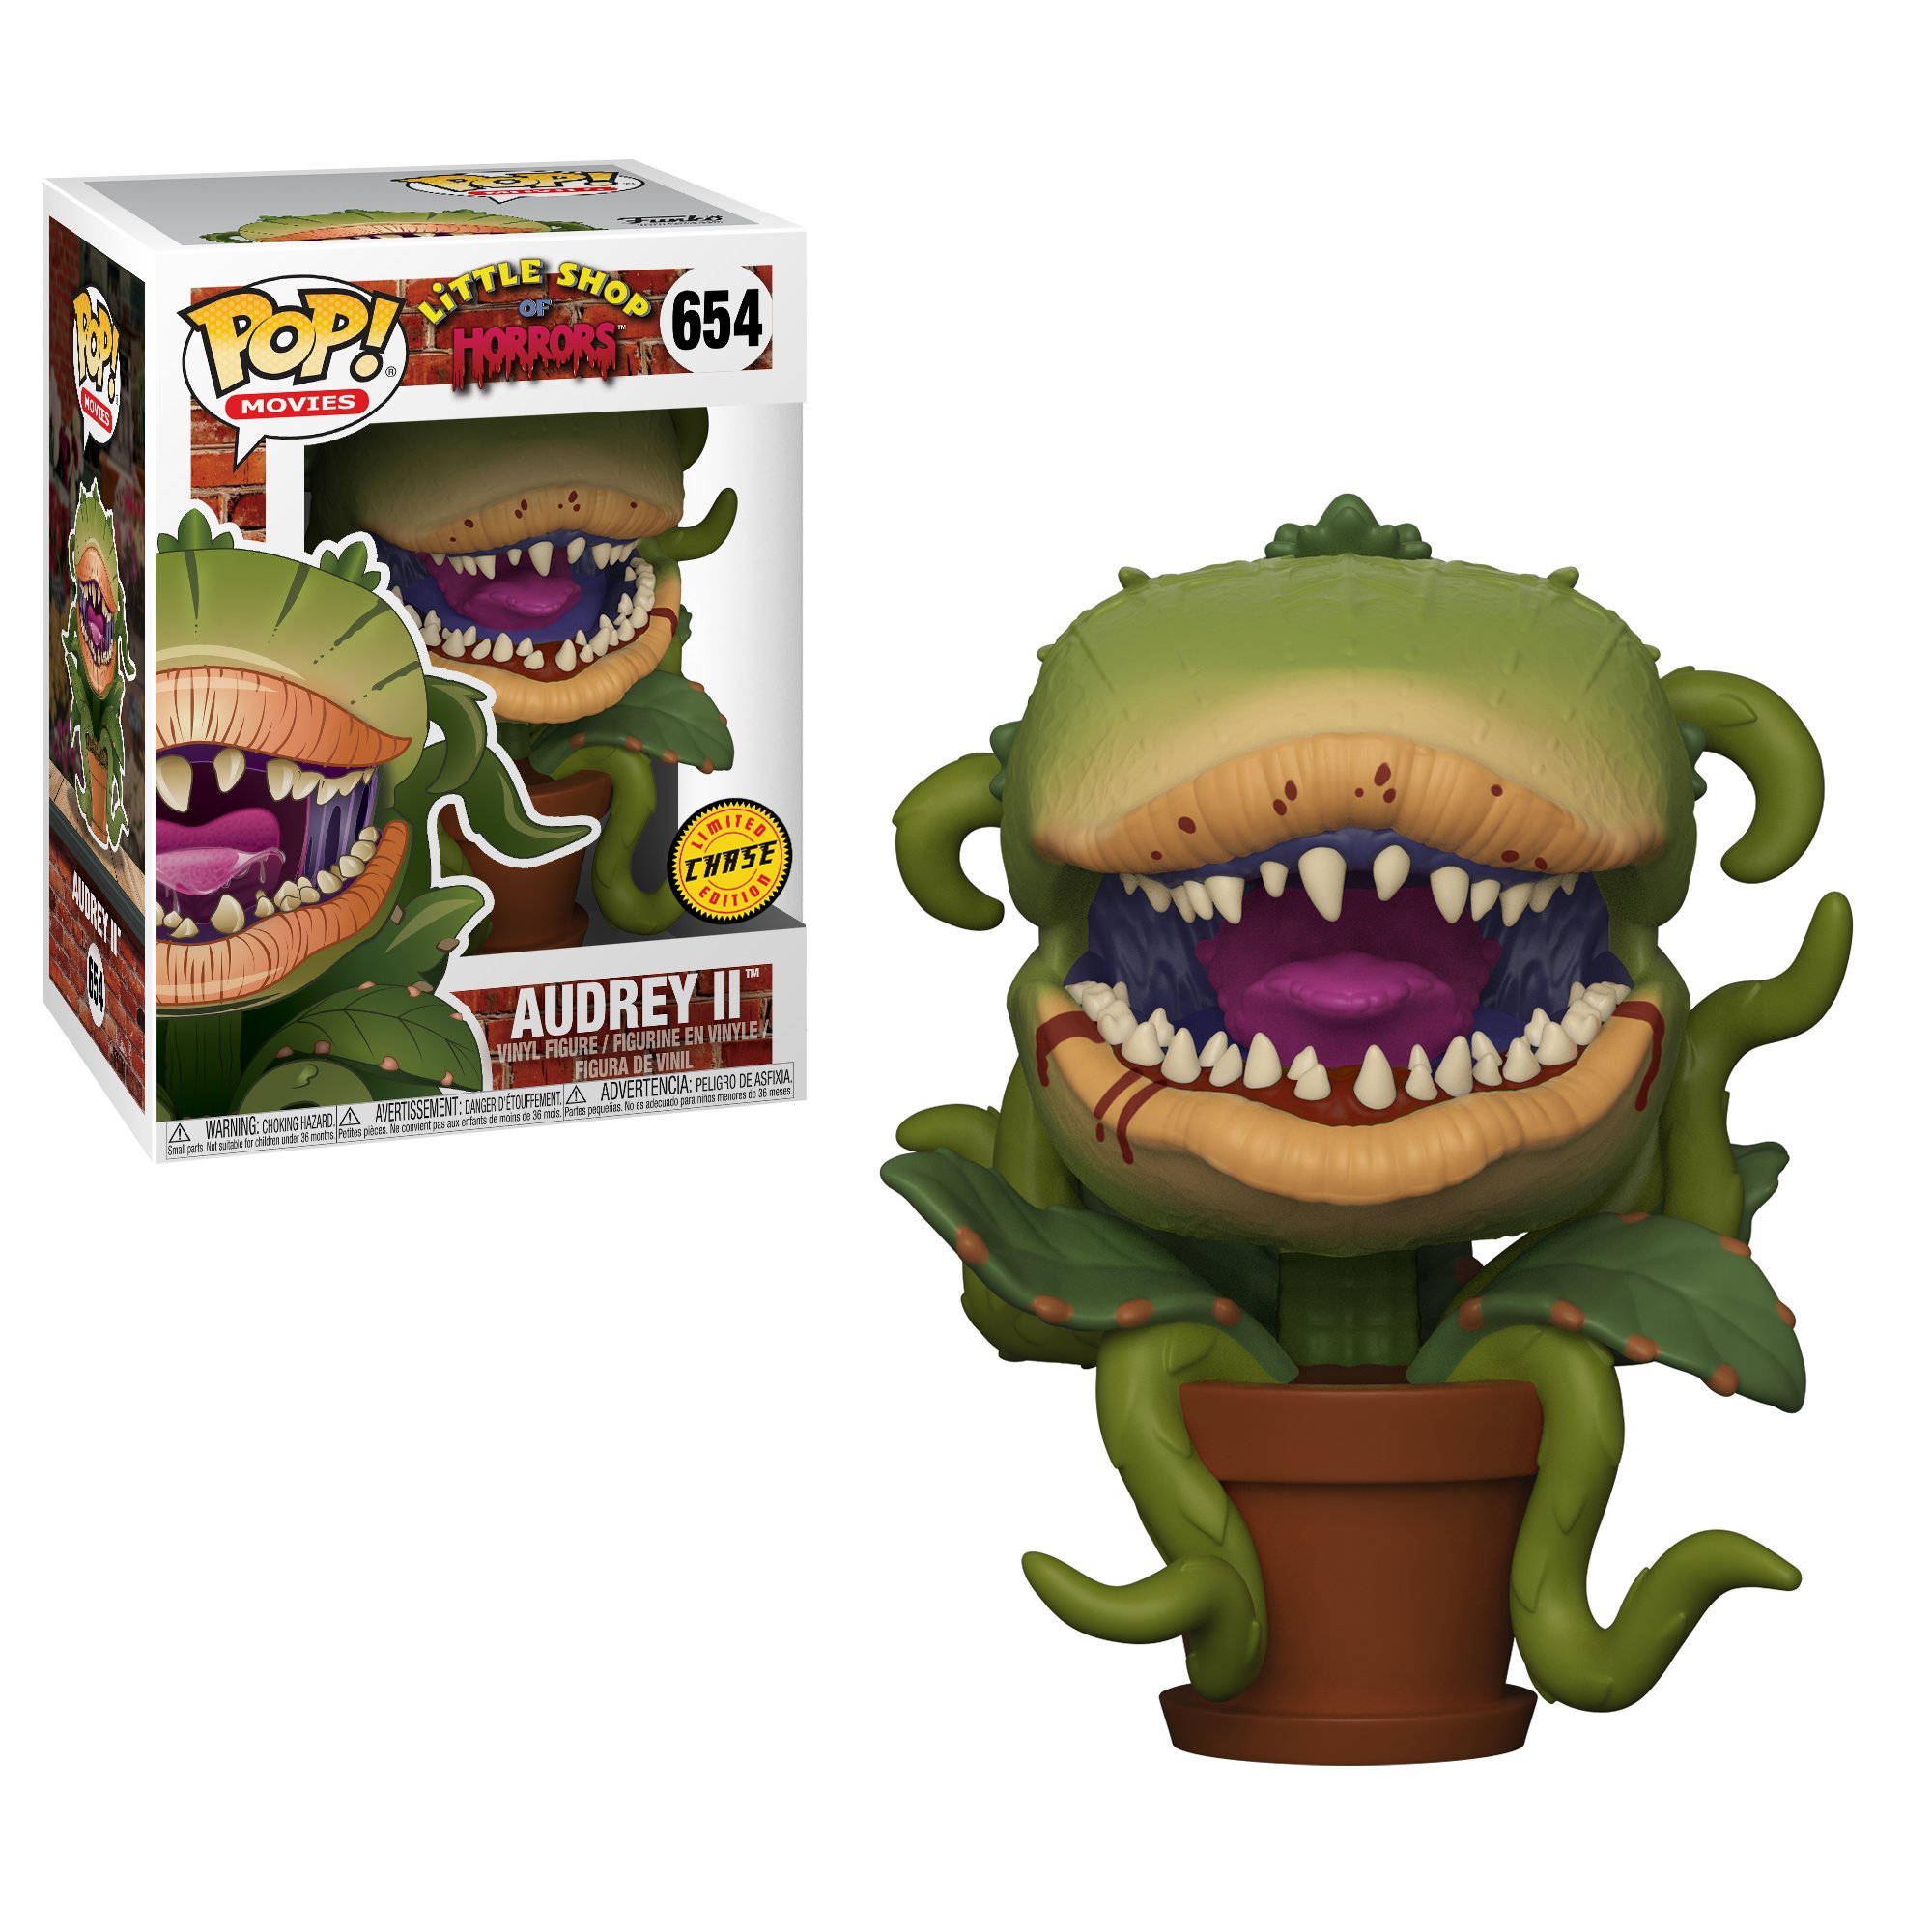 Funko Pop Movies: Little Shop of Horrors - Audrey Ii (Styles May Vary) Collectible Figure, Multicolor, 3.5